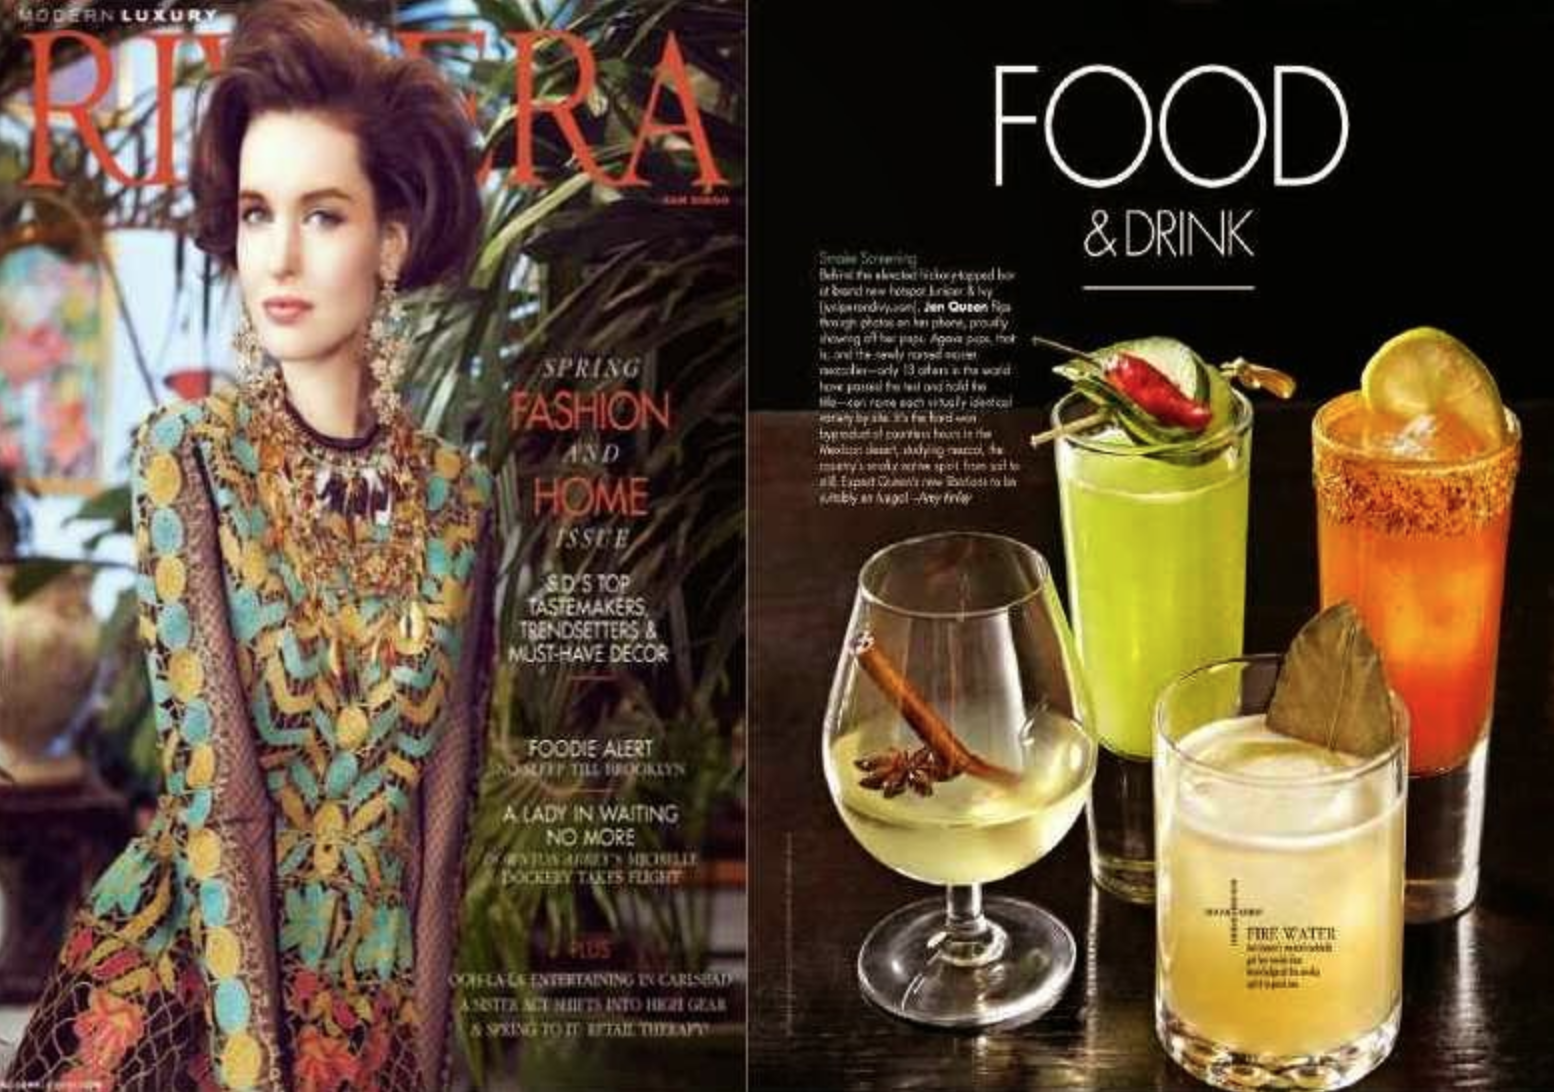 Modern Luxury Cover and Food & Drink article